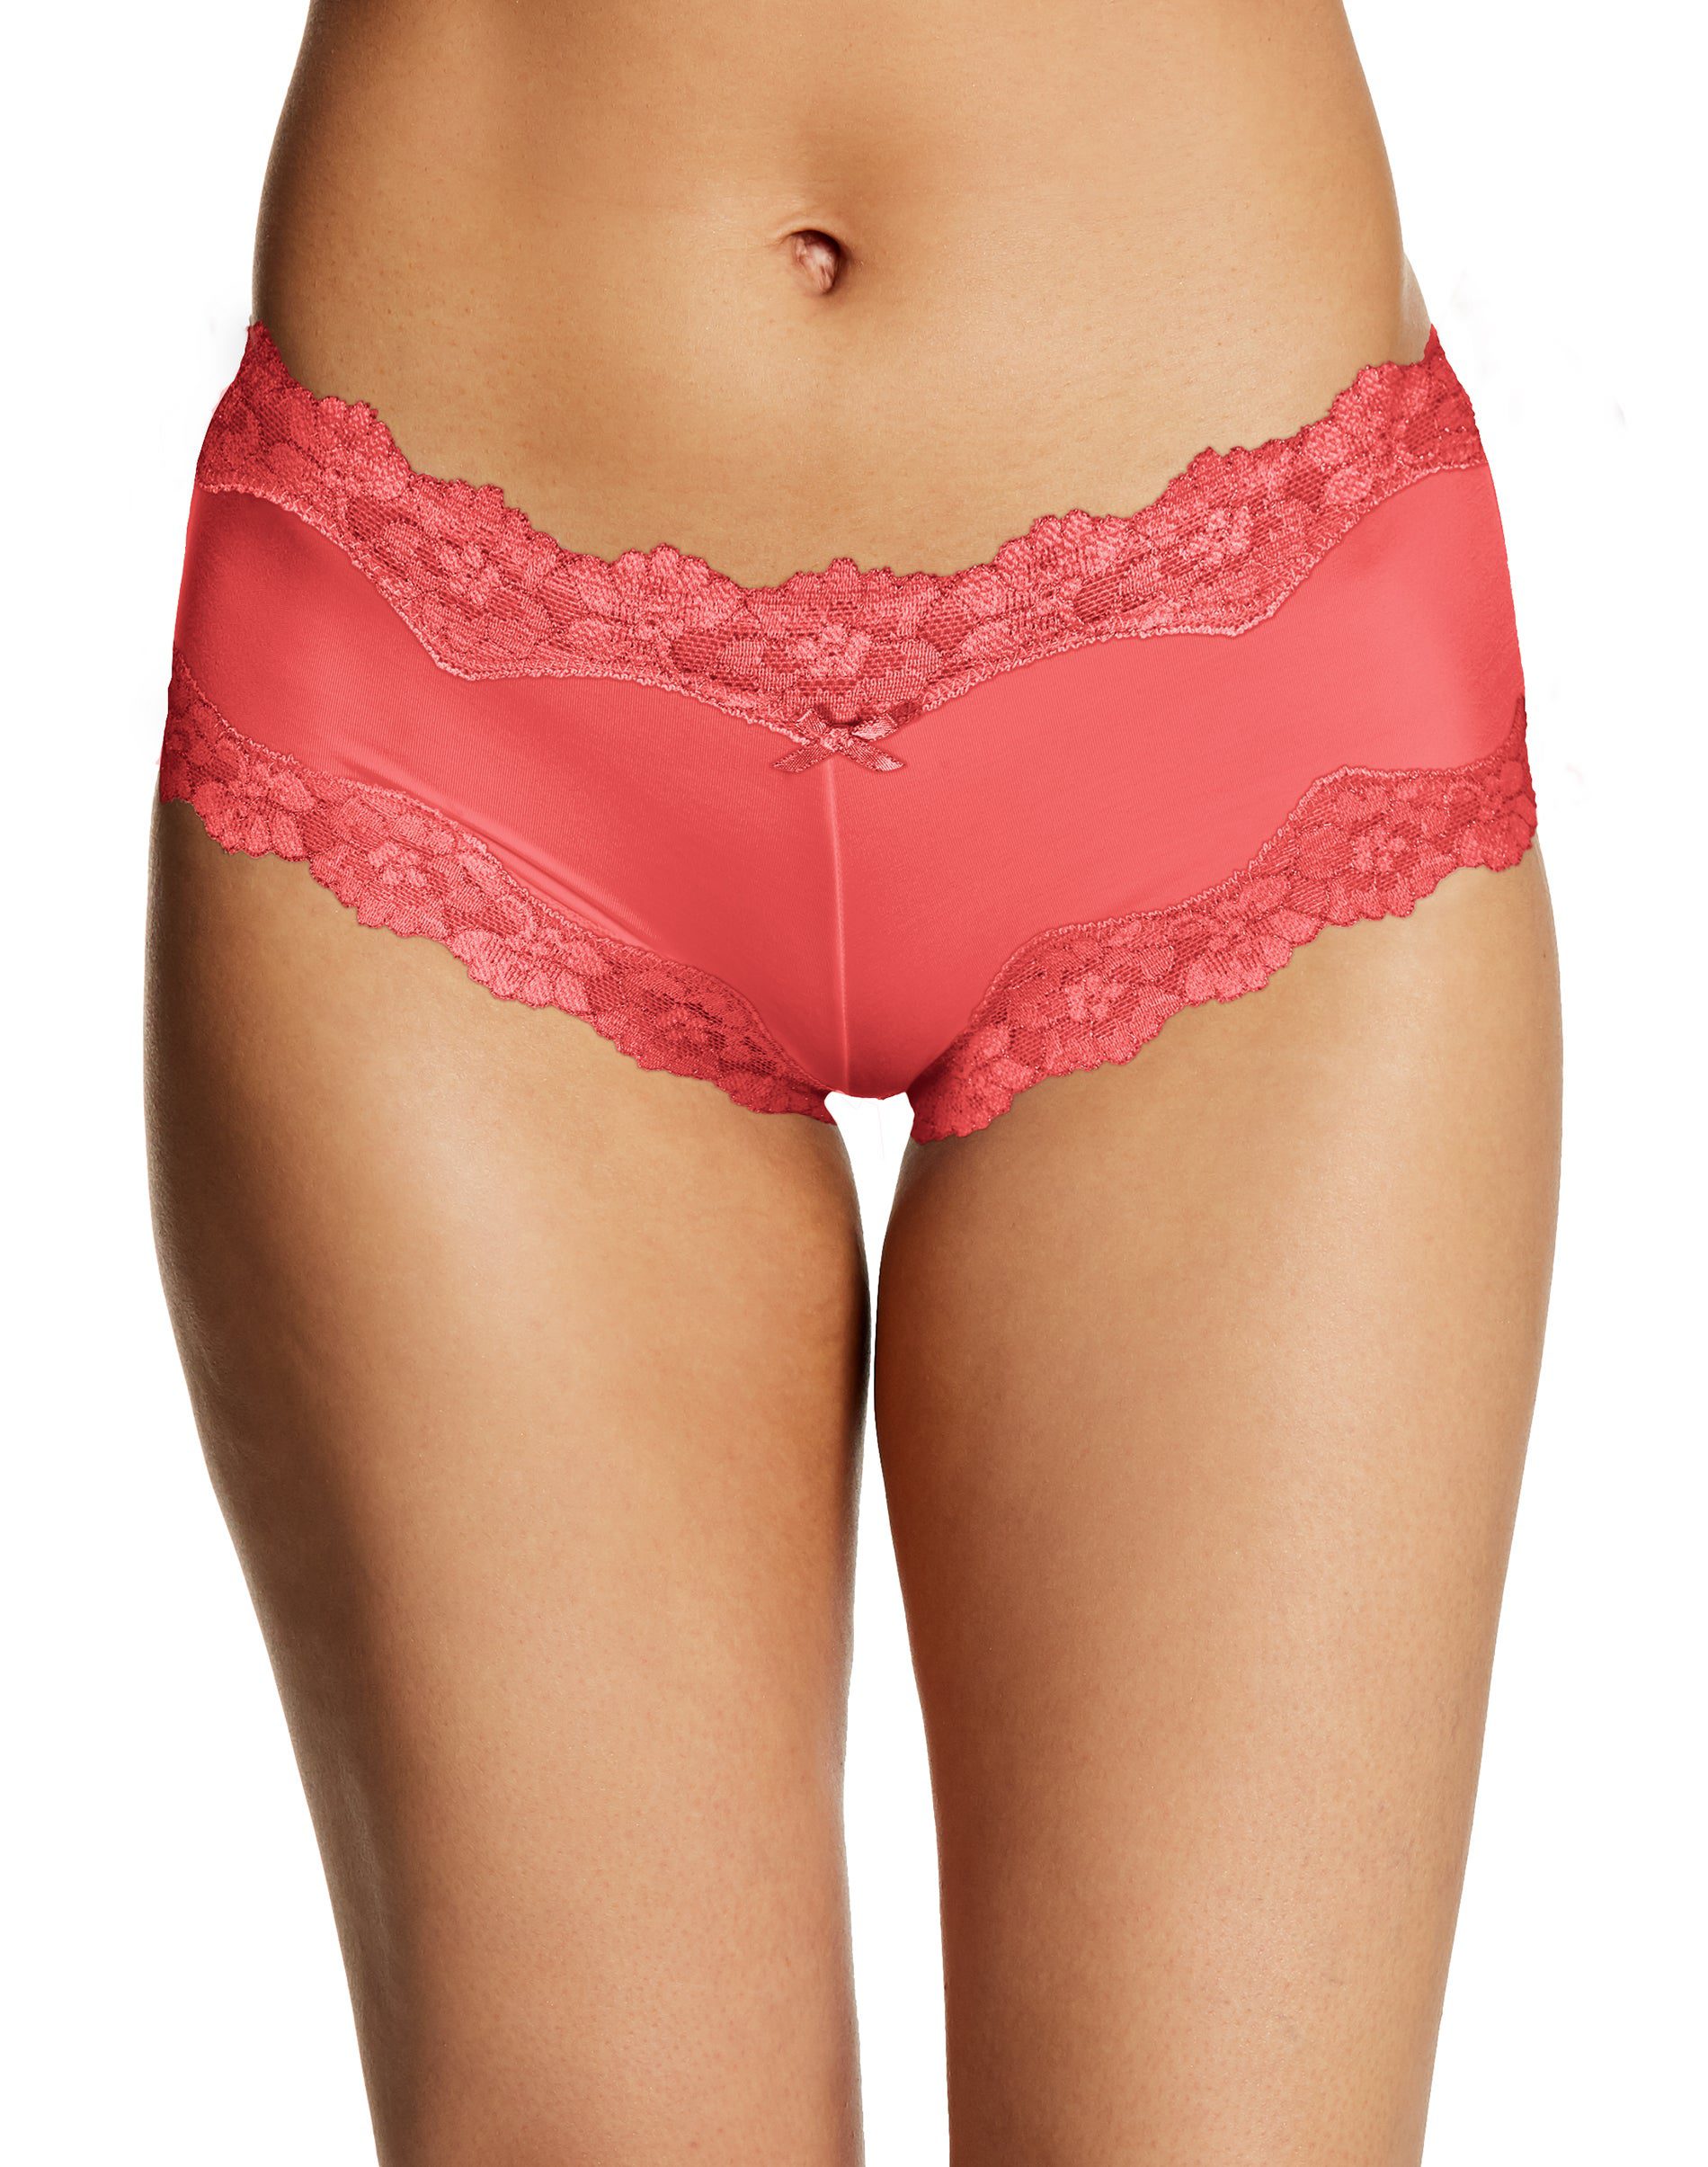 Maidenform Women's Underwear Pack, Low-Rise Cheeky Fit, Scalloped